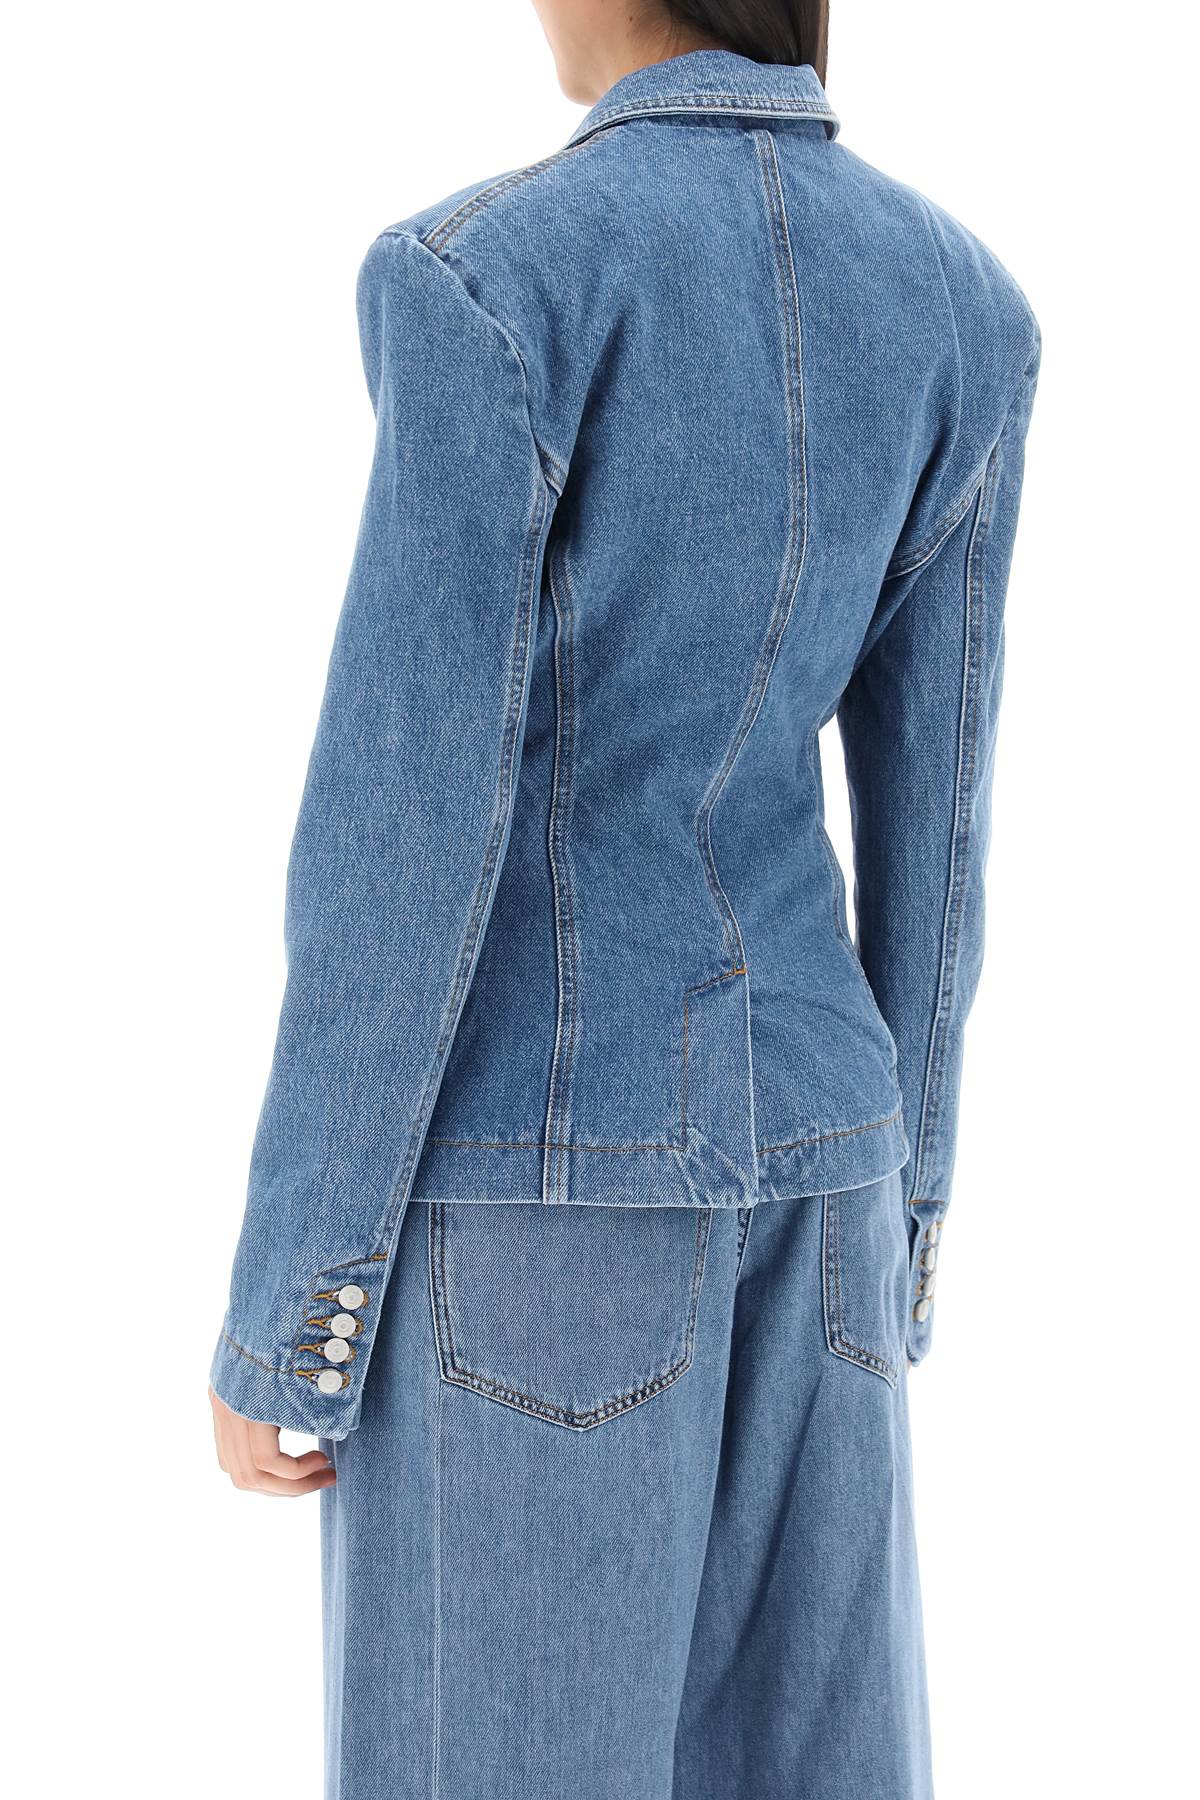 Denim Single-Breasted Jacket for Women by Magda Butrym - SS24